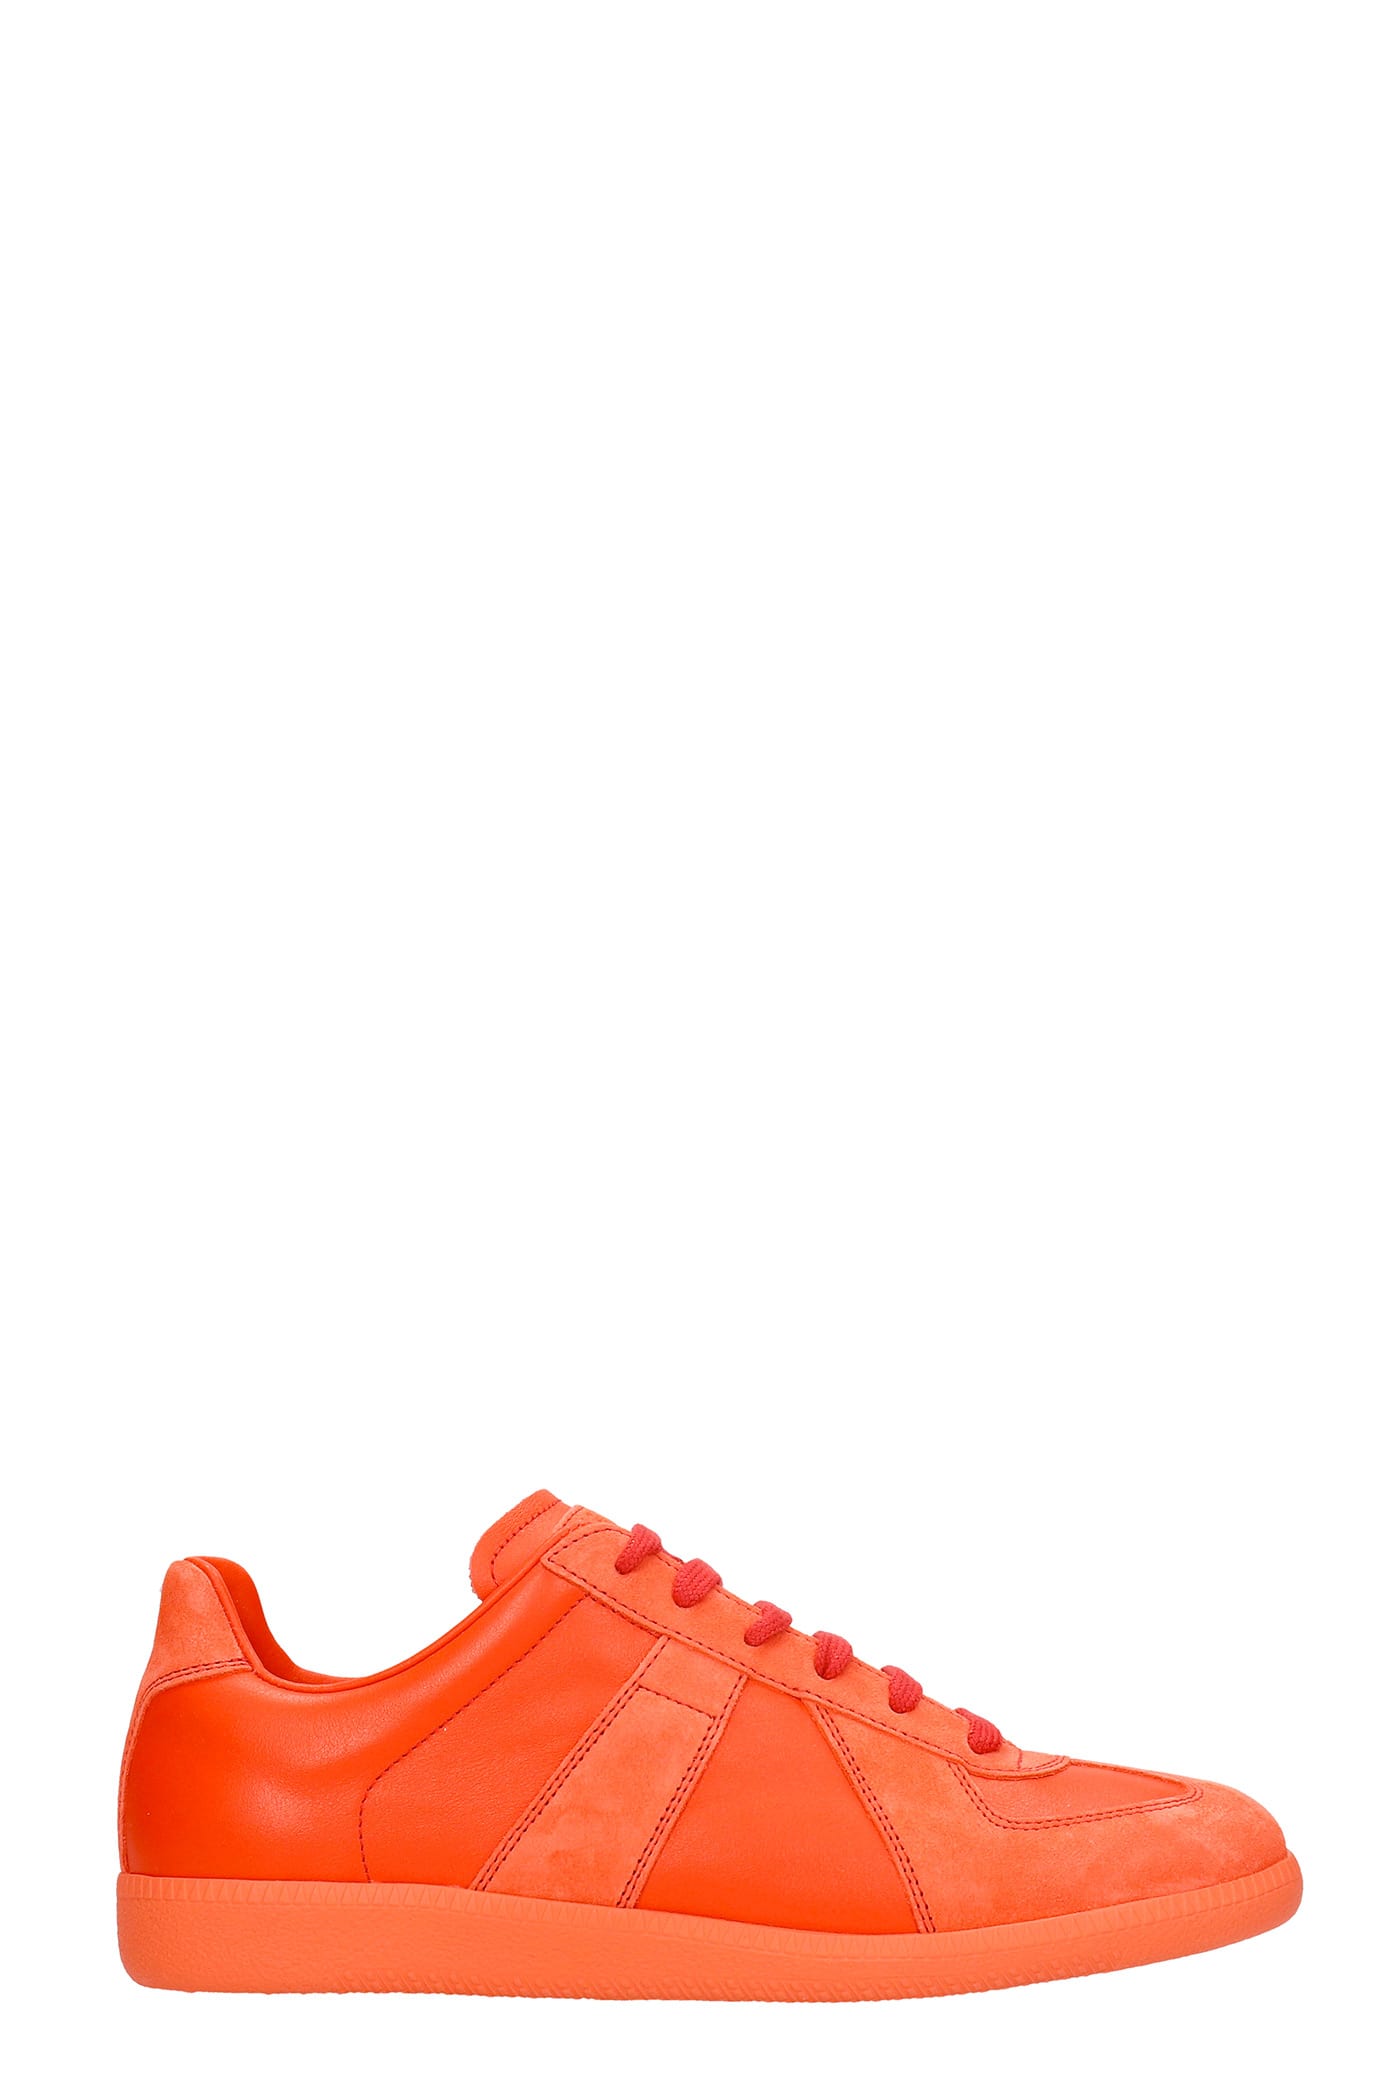 Maison Margiela Replica Sneakers In Orange Suede And Leather